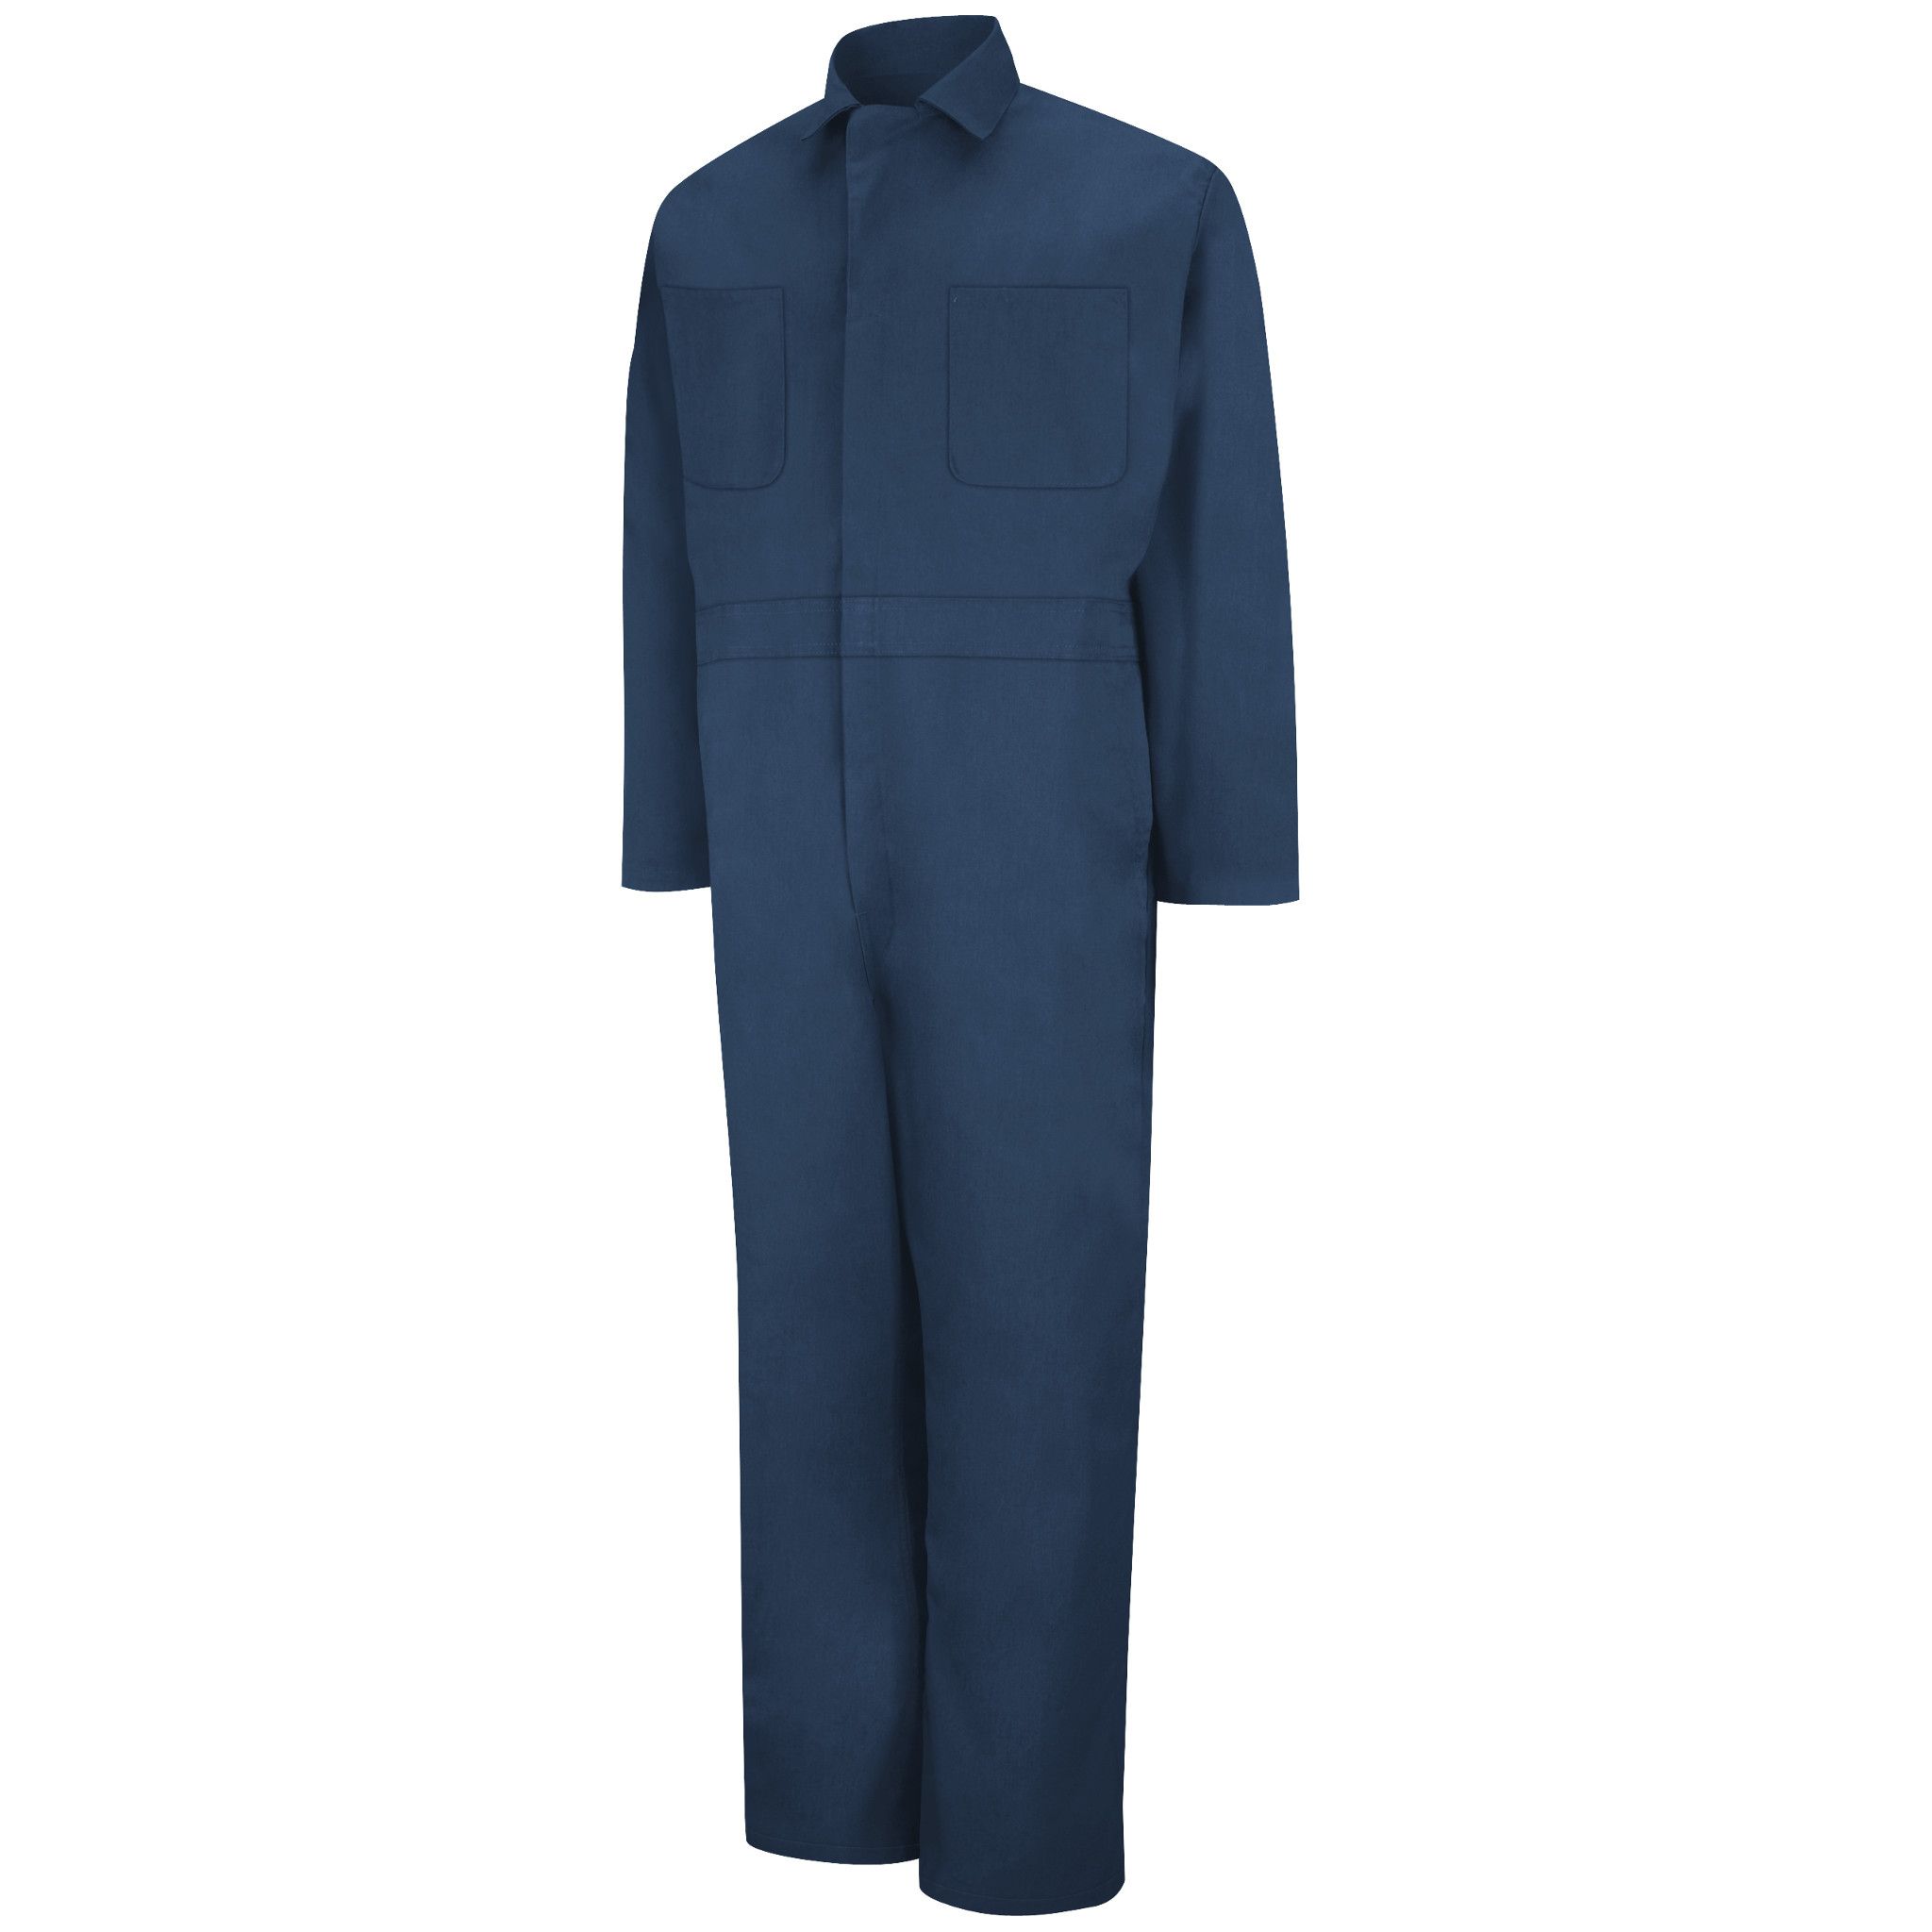 Coveralls navy blue